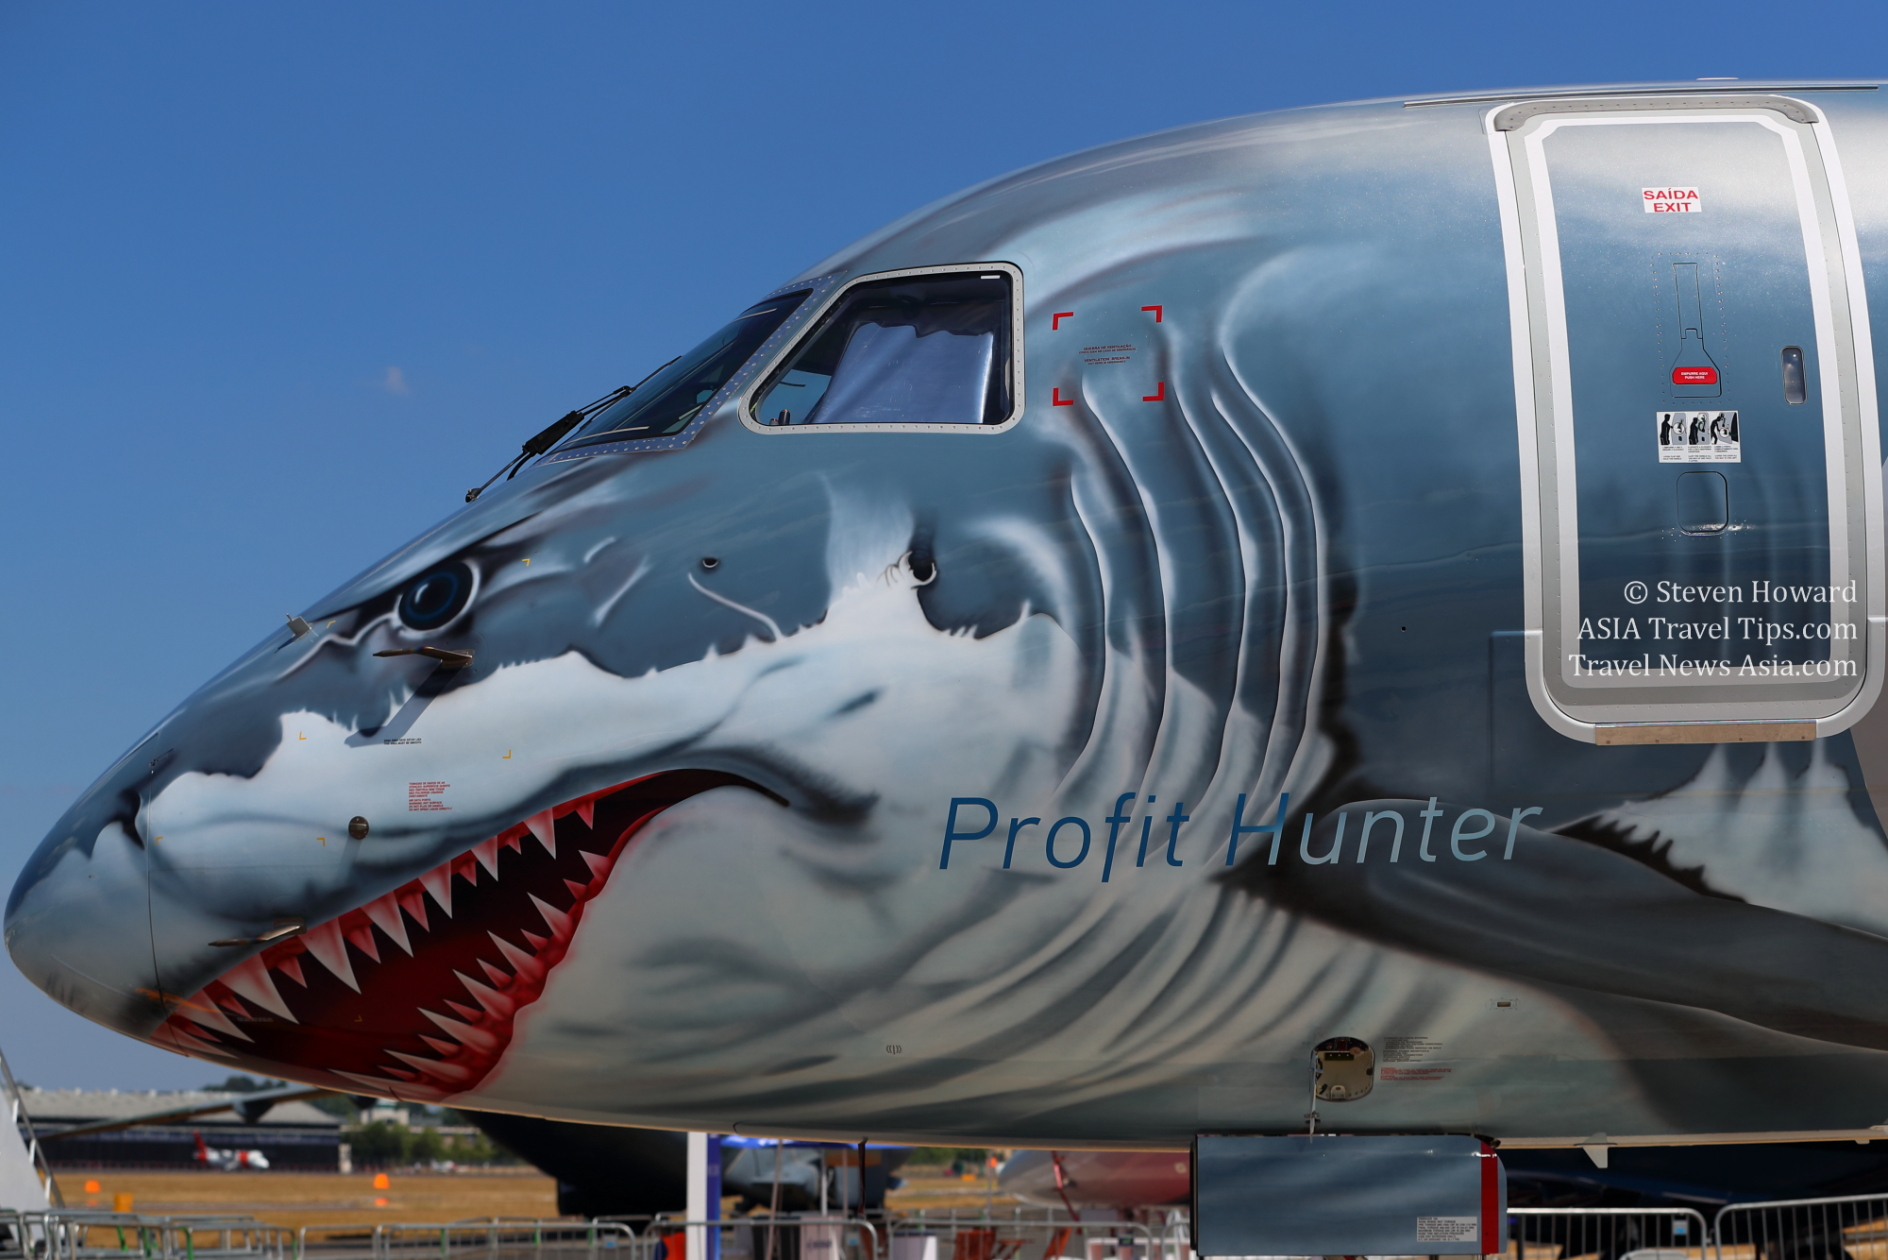 Embraer E190-E2 Tech Shark. Picture by Steven Howard of TravelNewsAsia.com Click to enlarge.